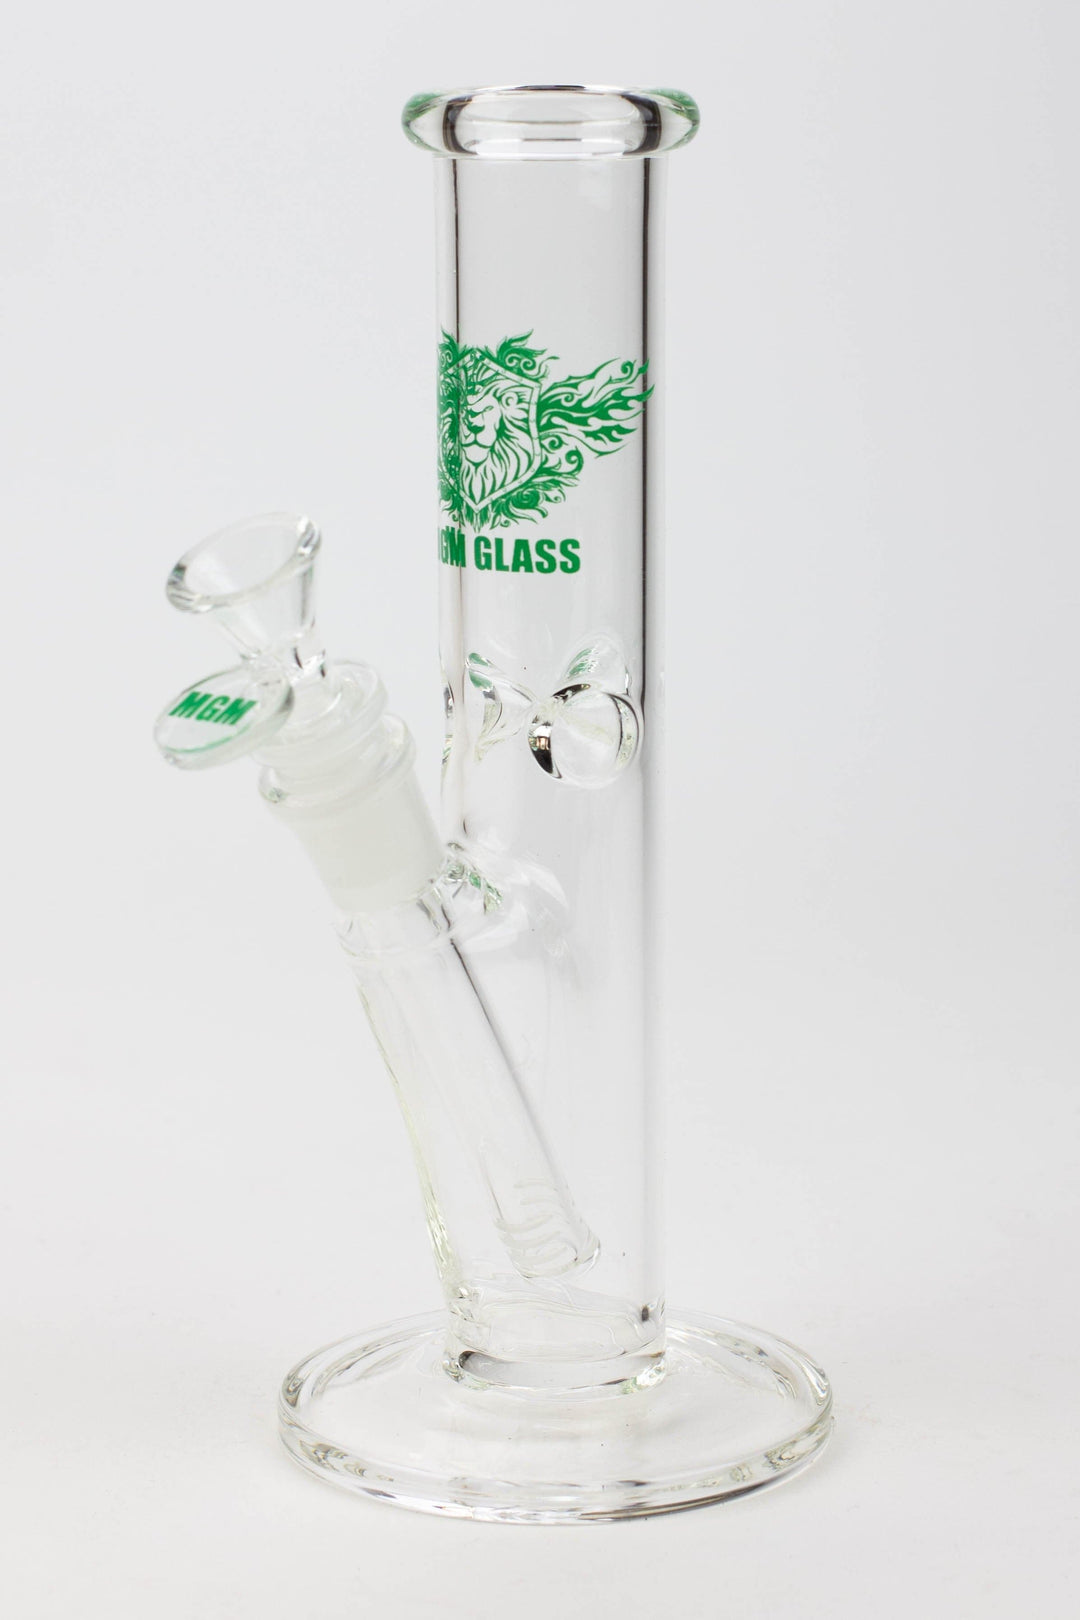 Mgm glass straight tube glass water pipes_3